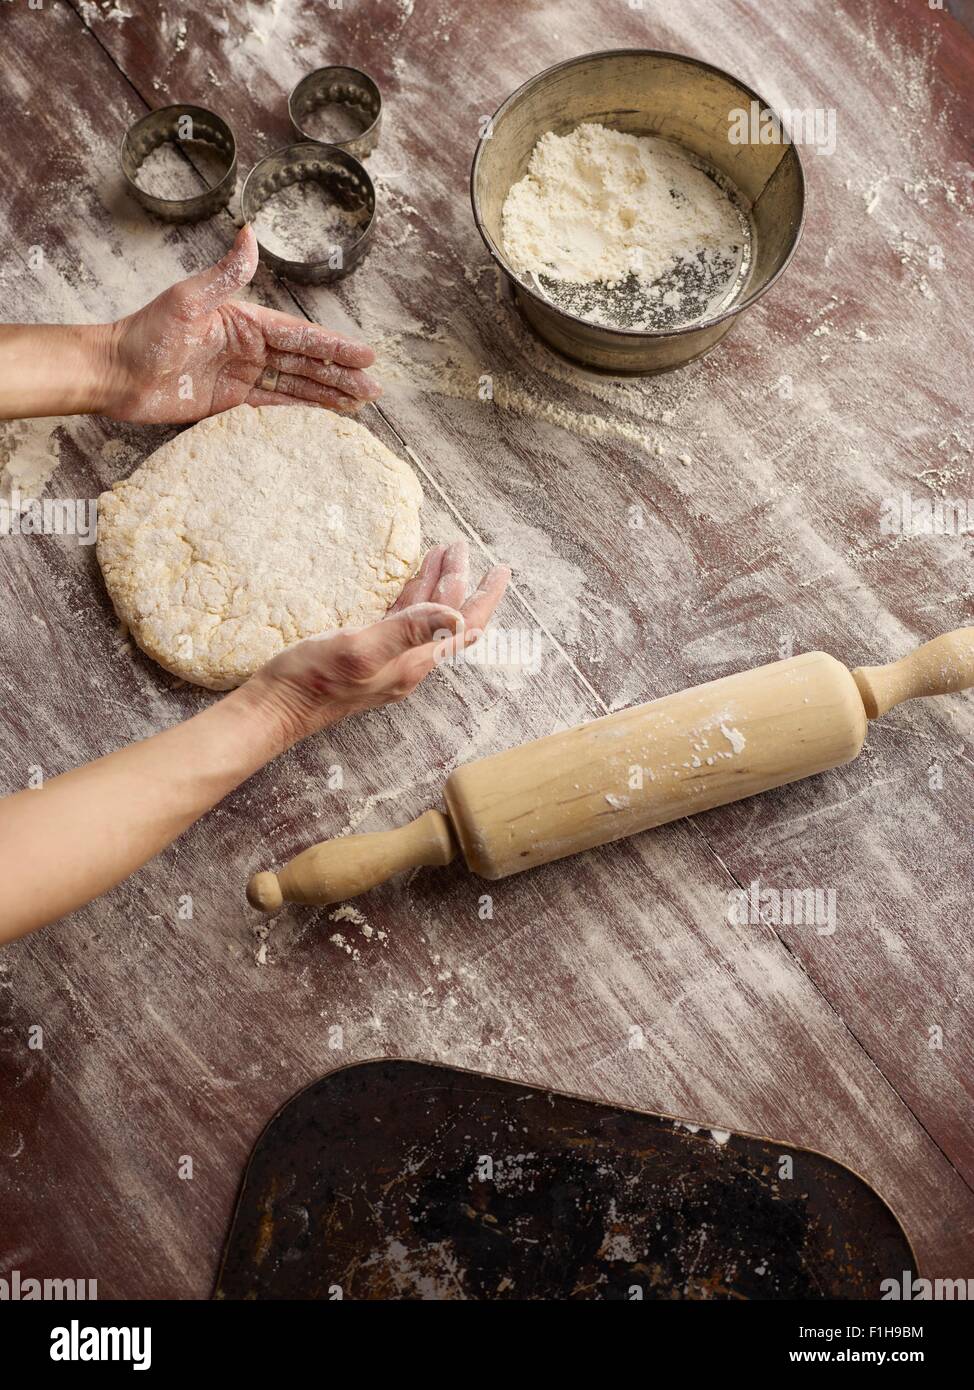 Overhead view of womans hands shaping scone dough Stock Photo